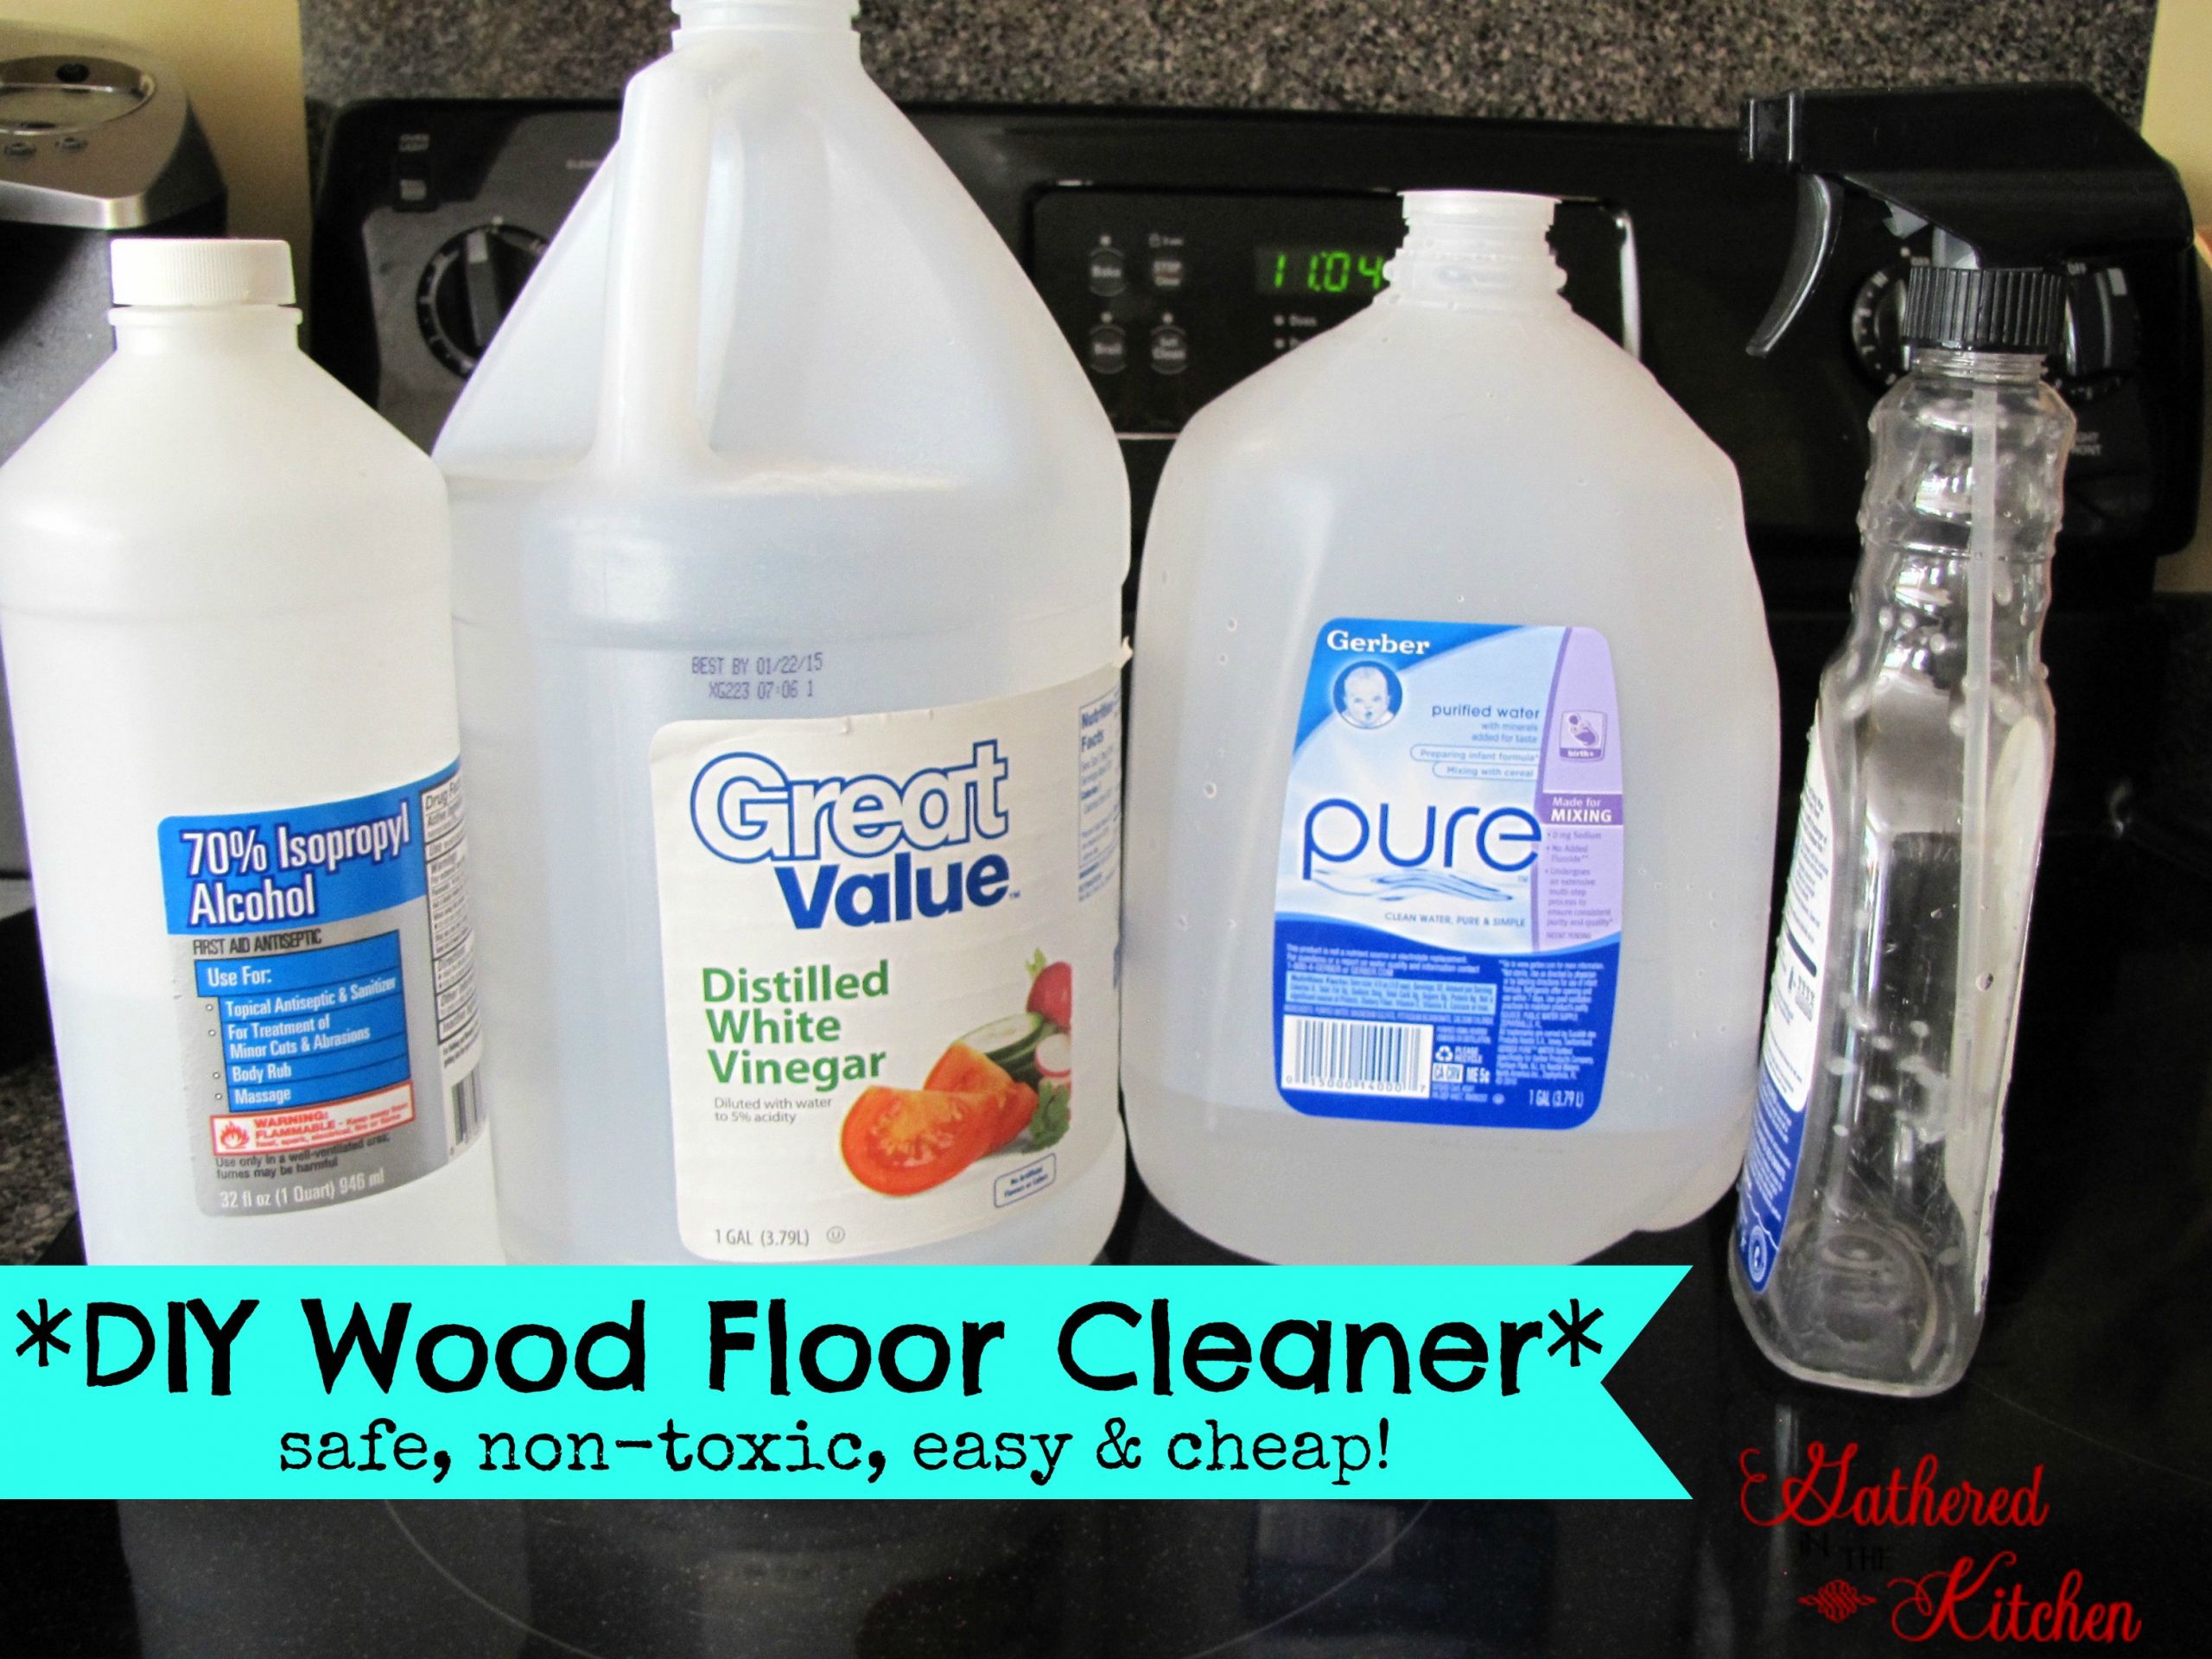 DIY Wood Floor Cleaner
 DIY Wood Floor Cleaner safe non toxic easy and cheap